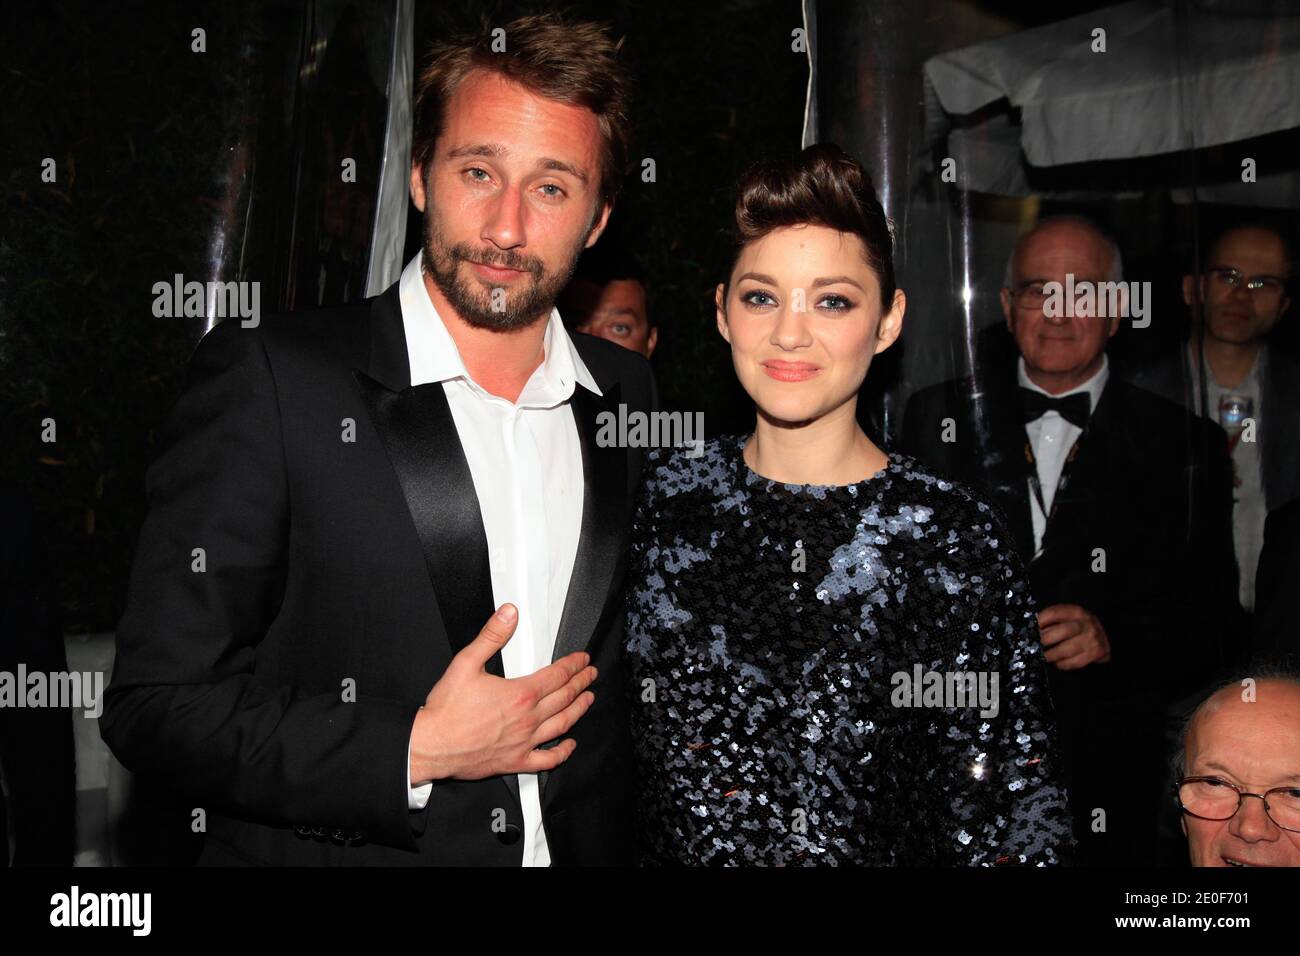 Exclusive - Matthias Schoenaerts and Marion Cotillard at Rust and Bone ...